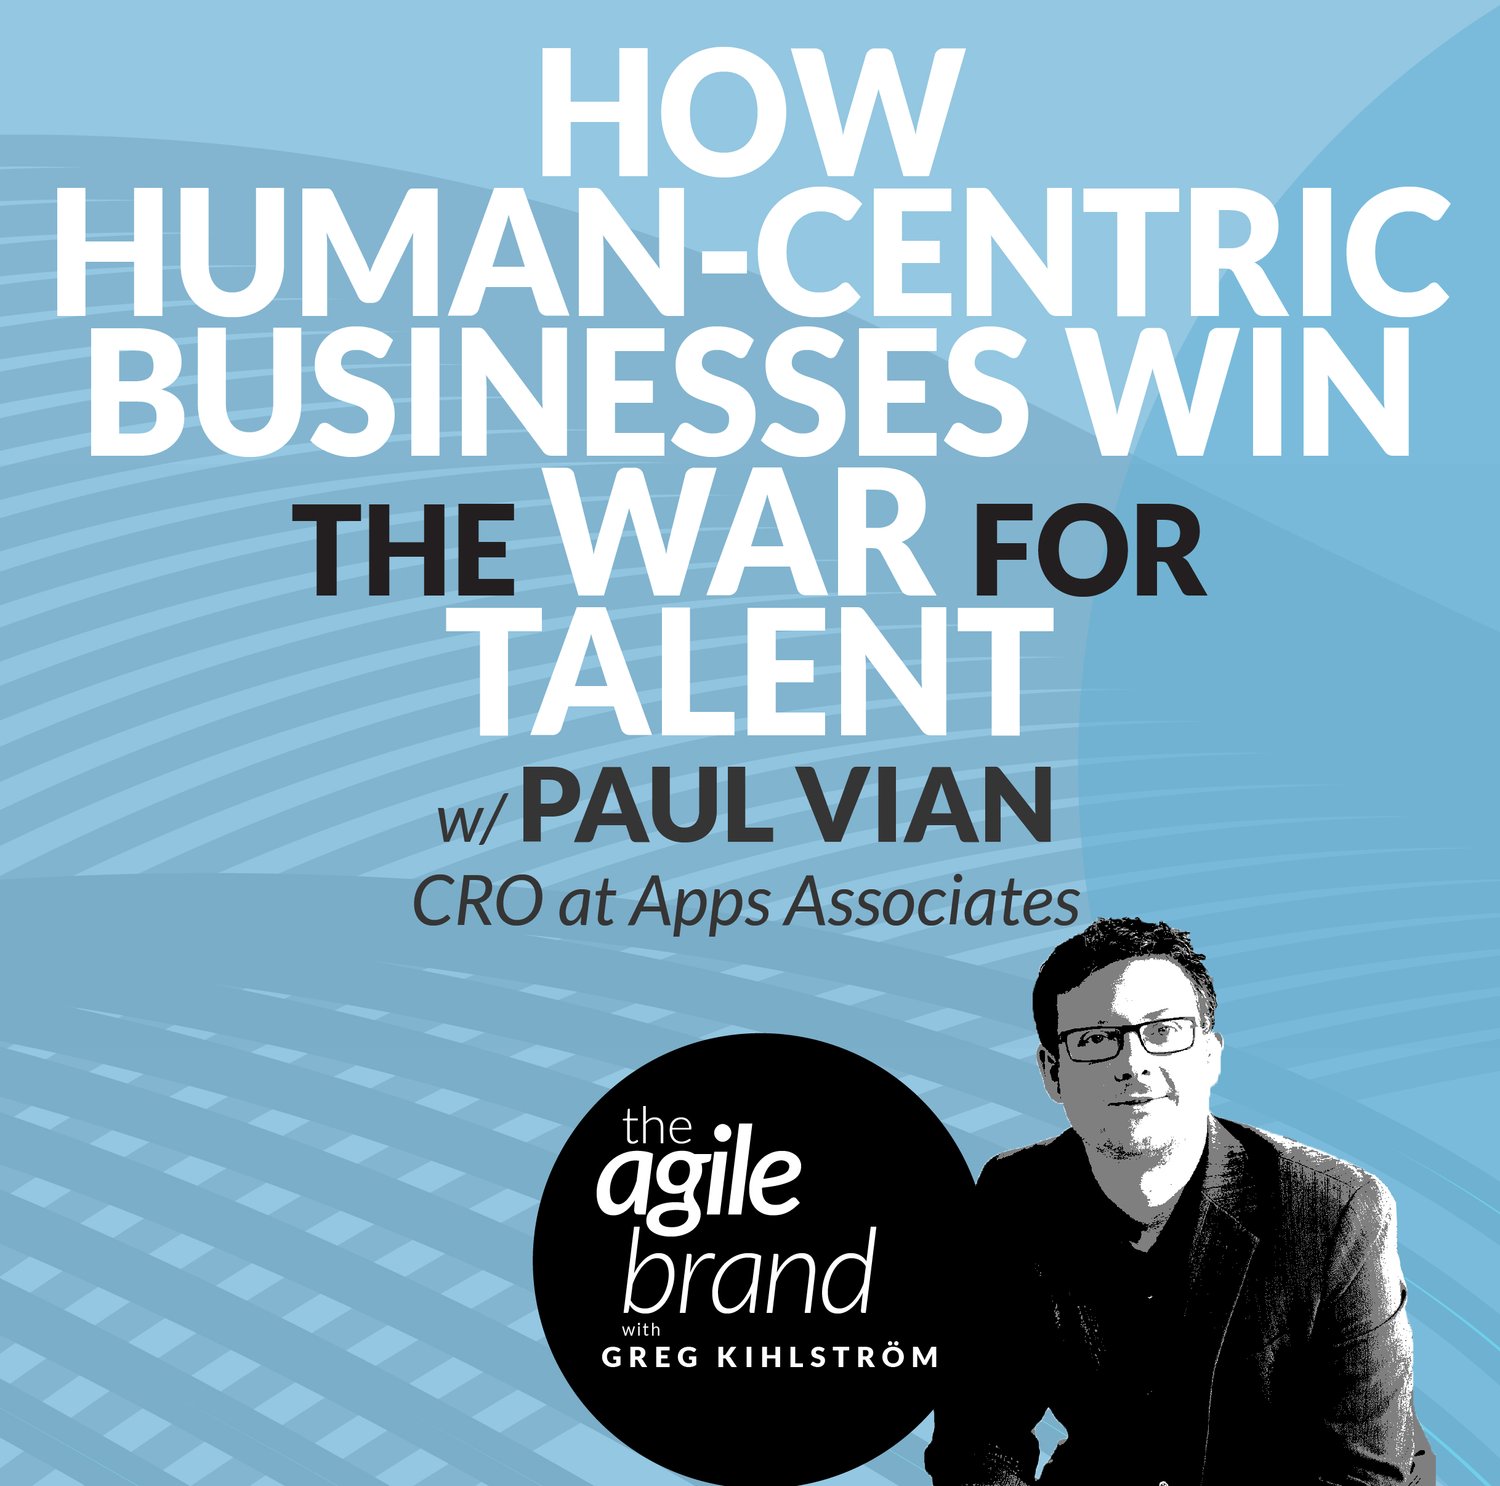 S5 | 347: How human-centric businesses win the war for talent with Paul Vian, Chief Revenue Officer at Apps Associates